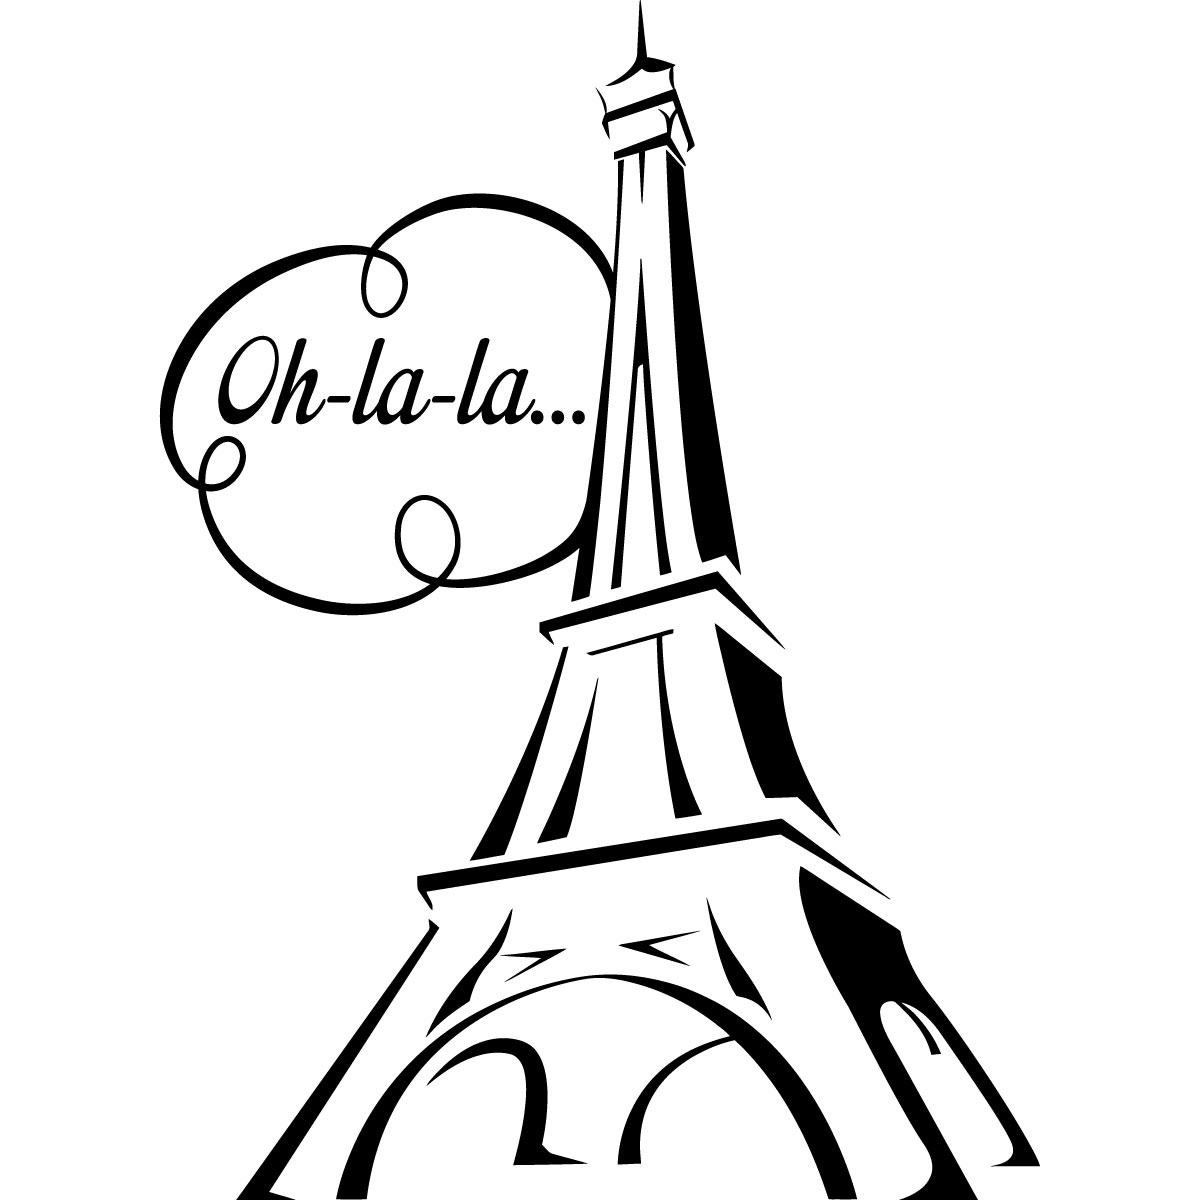 Wall decal Eiffel tower with Oh-la-la